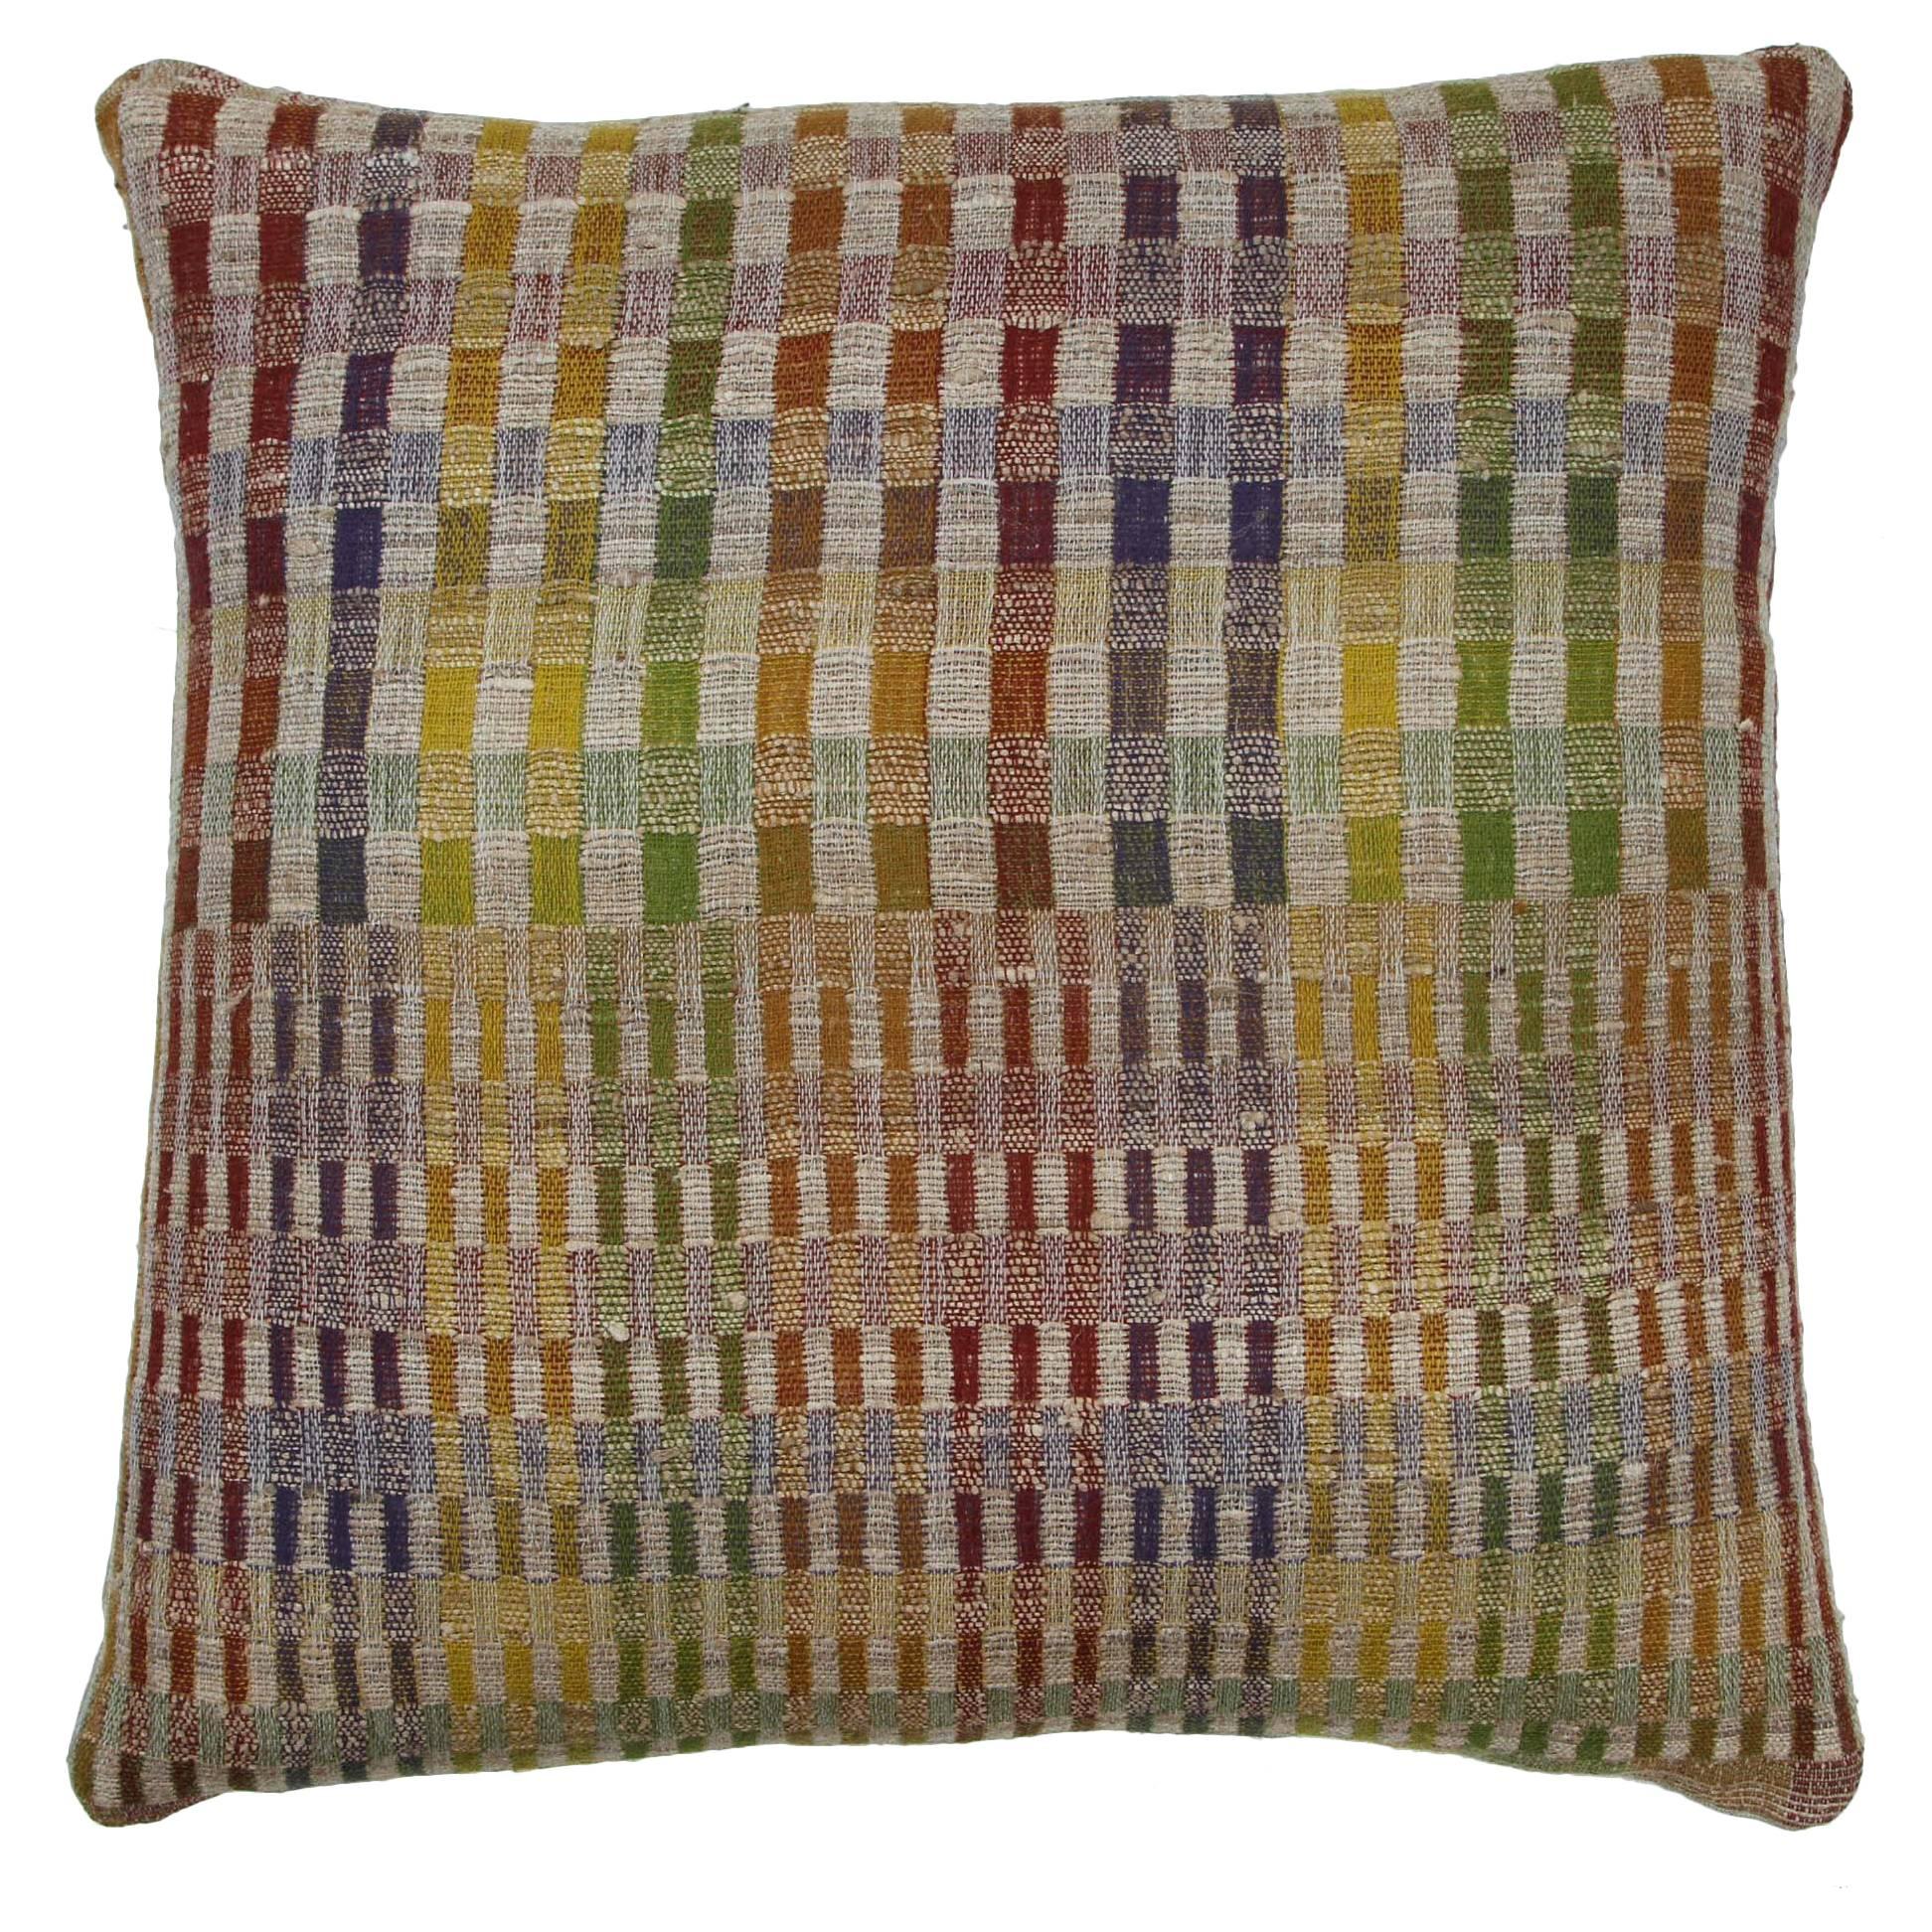 Indian Hand Woven Pillow.   Red, Orange, Green, Yellow, Purple.   Wool and silk. For Sale